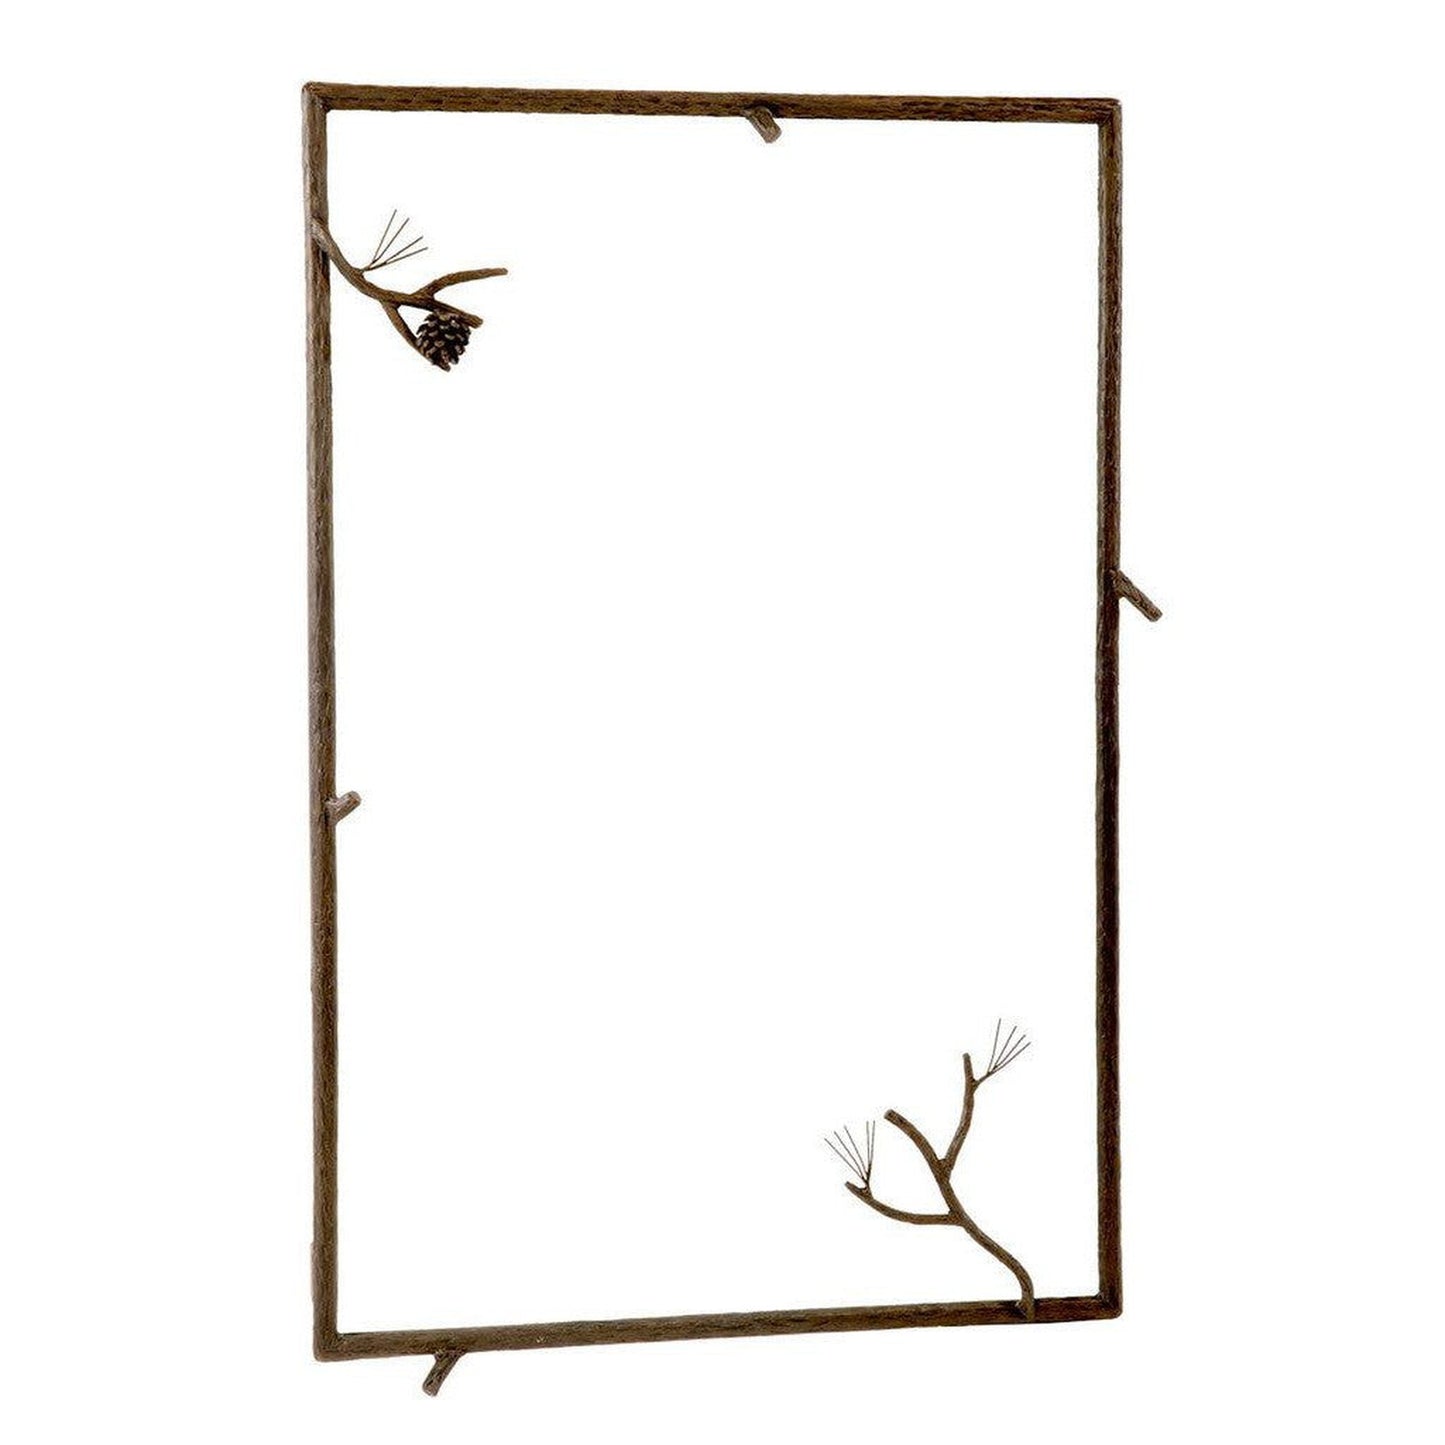 Stone County Ironworks Pine 37" x 25" Large Natural Bark Iron Wall Mirror With Gold Iron Accent